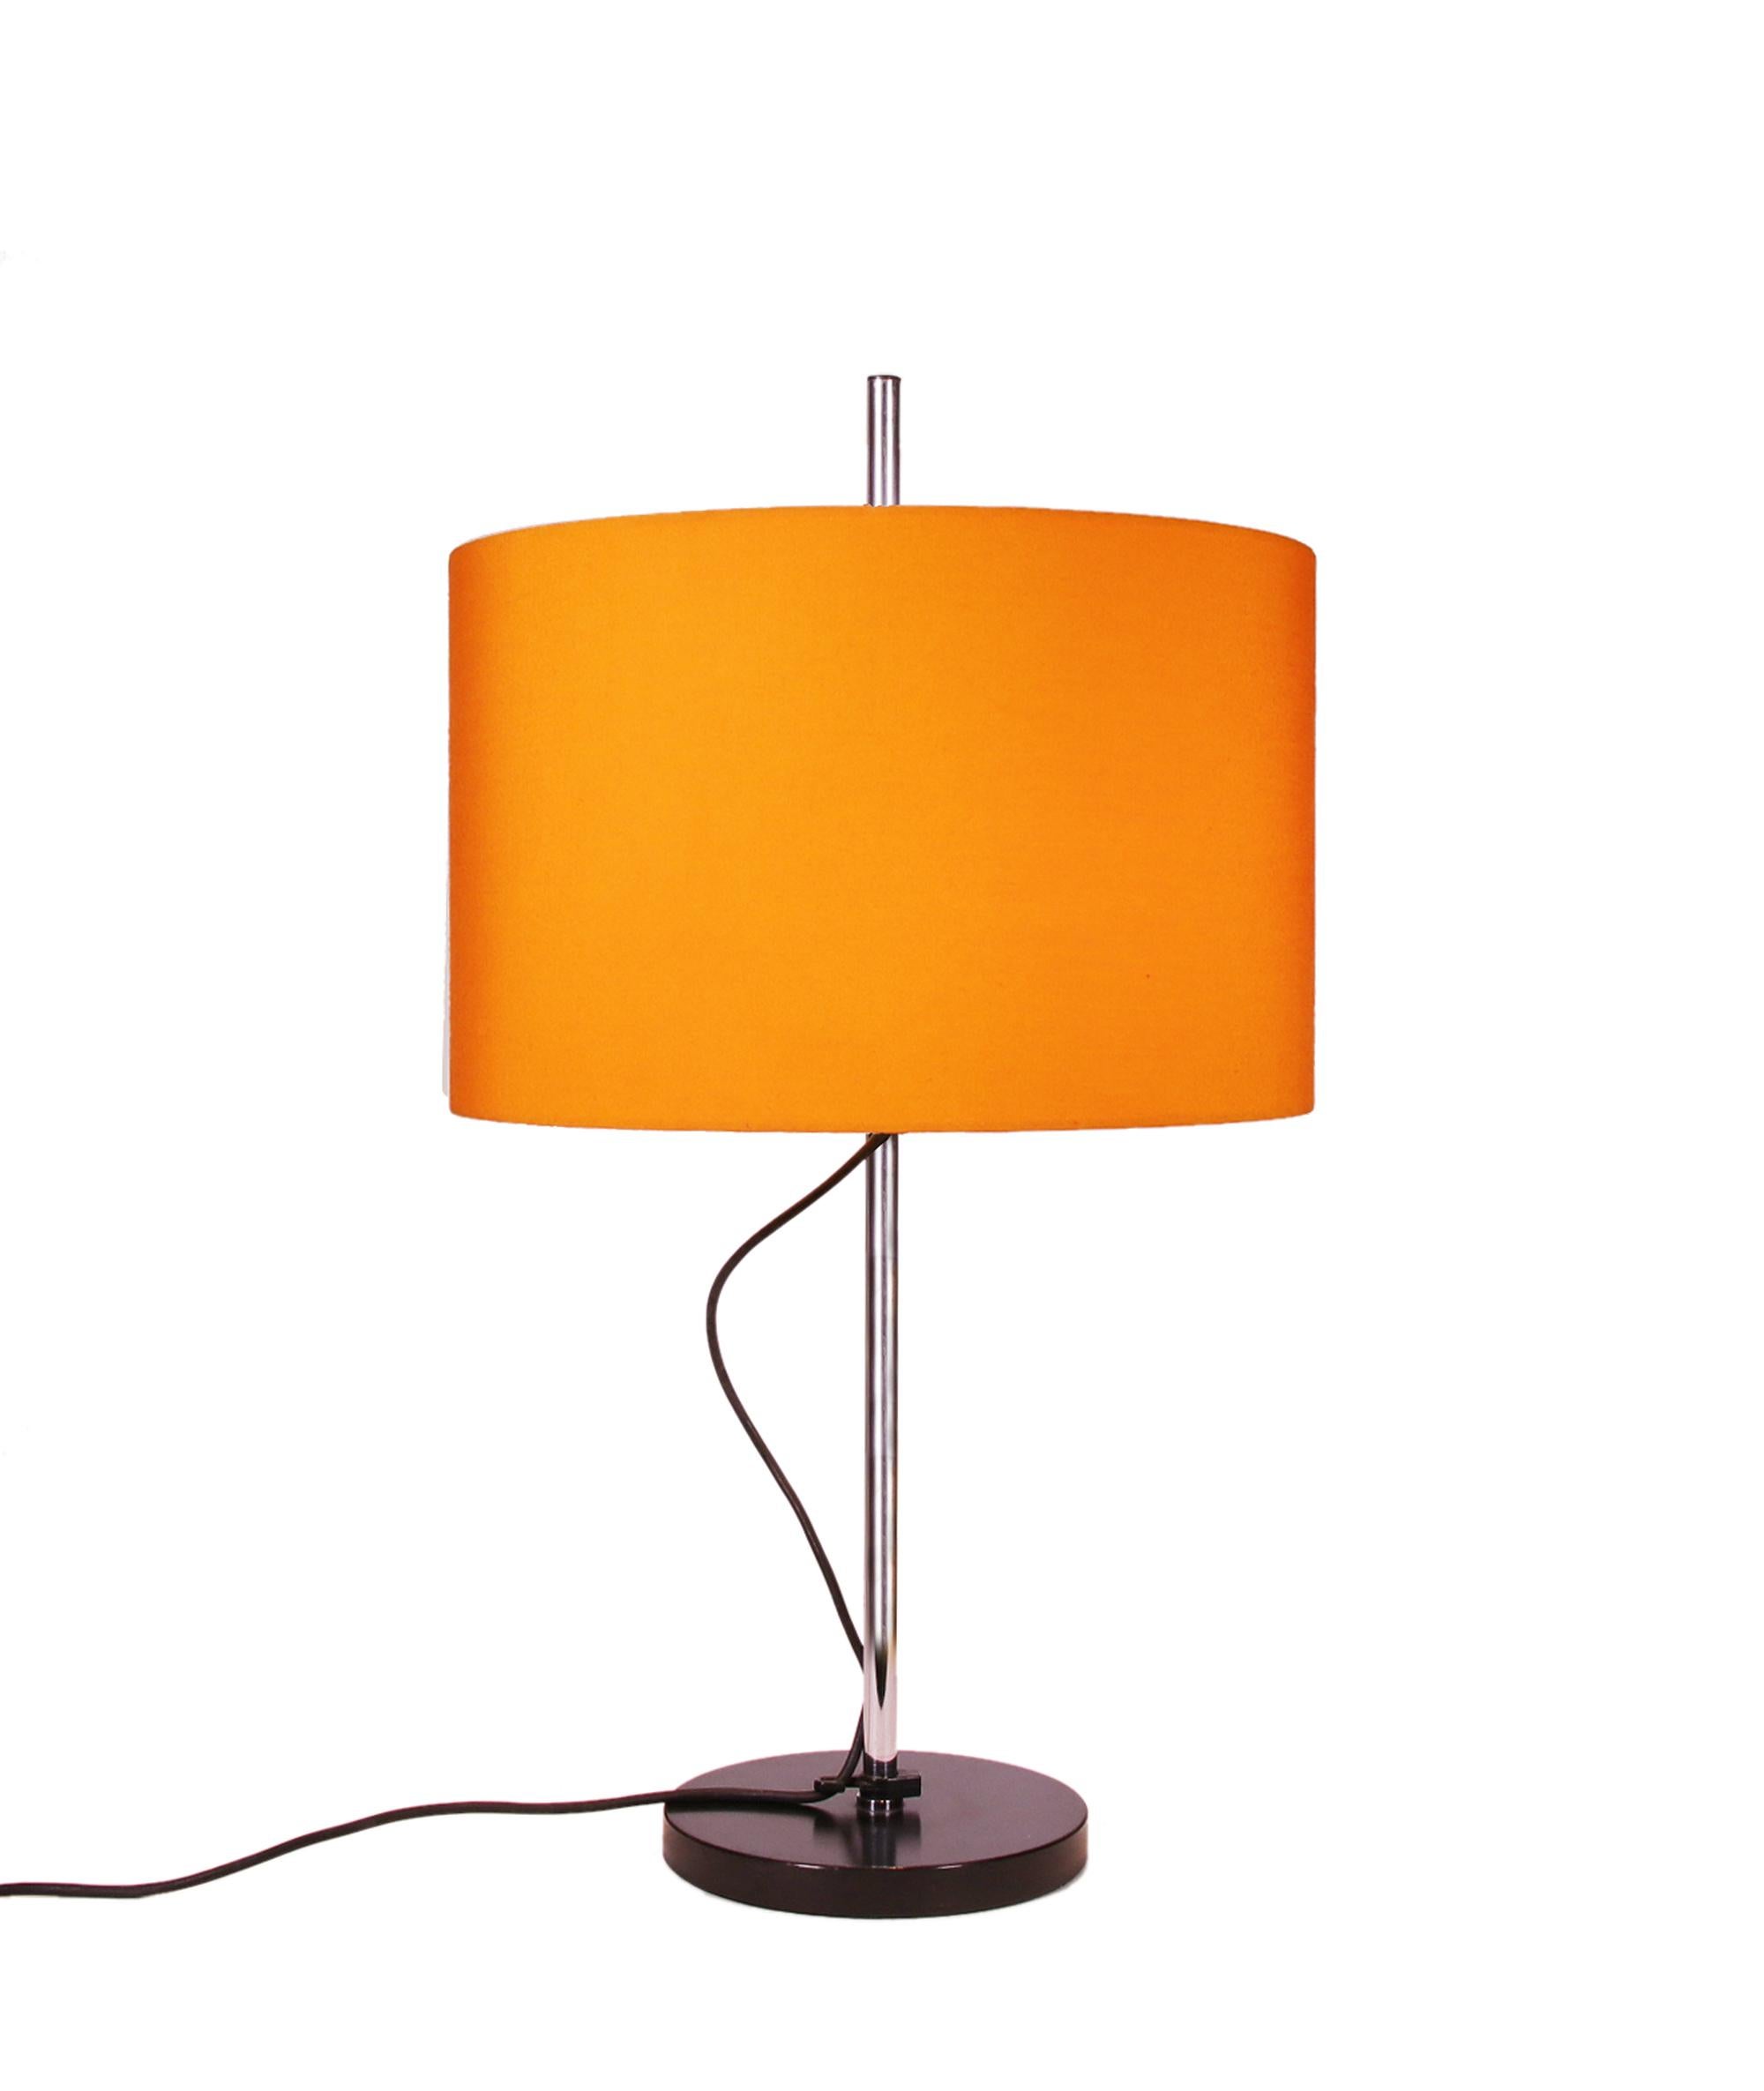 Elegant set of two table lamps with chrome steel rod, black metal foot and the original orange adjustable lamp shade. 

Measures: height: 15.75